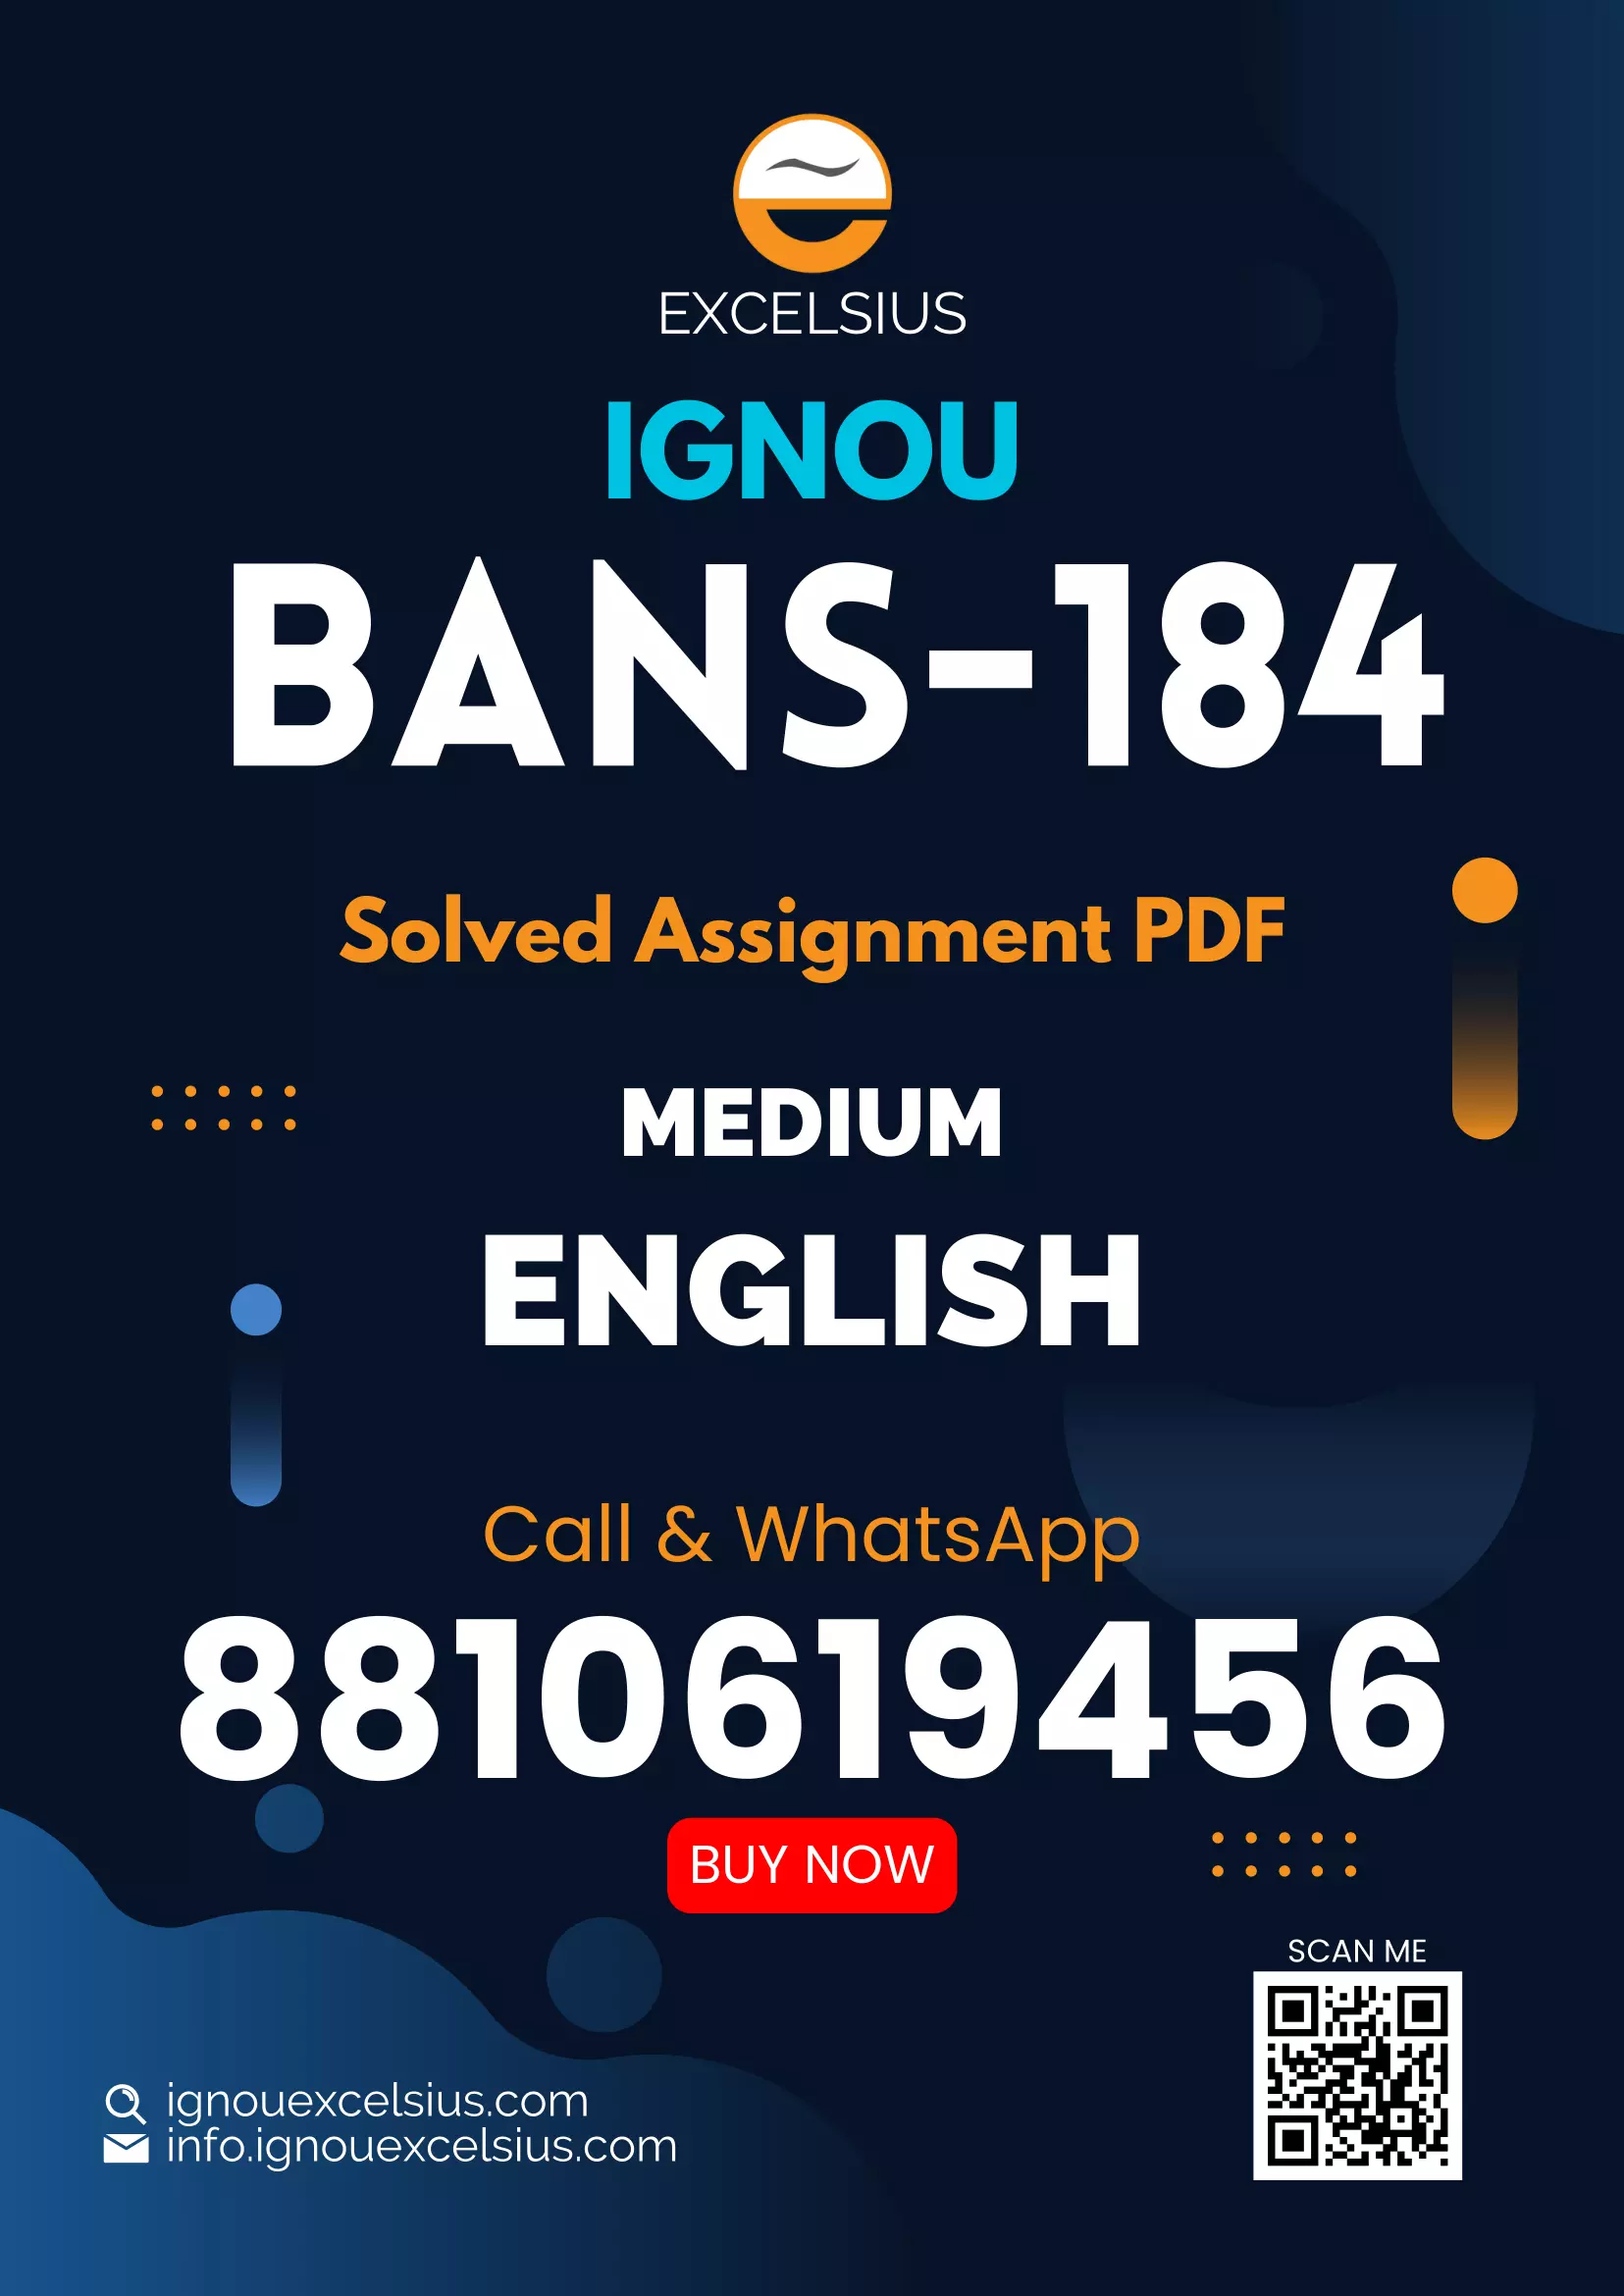 IGNOU BANS-184 - Public Health and Epidemiology, Latest Solved Assignment-July 2023 - January 2024